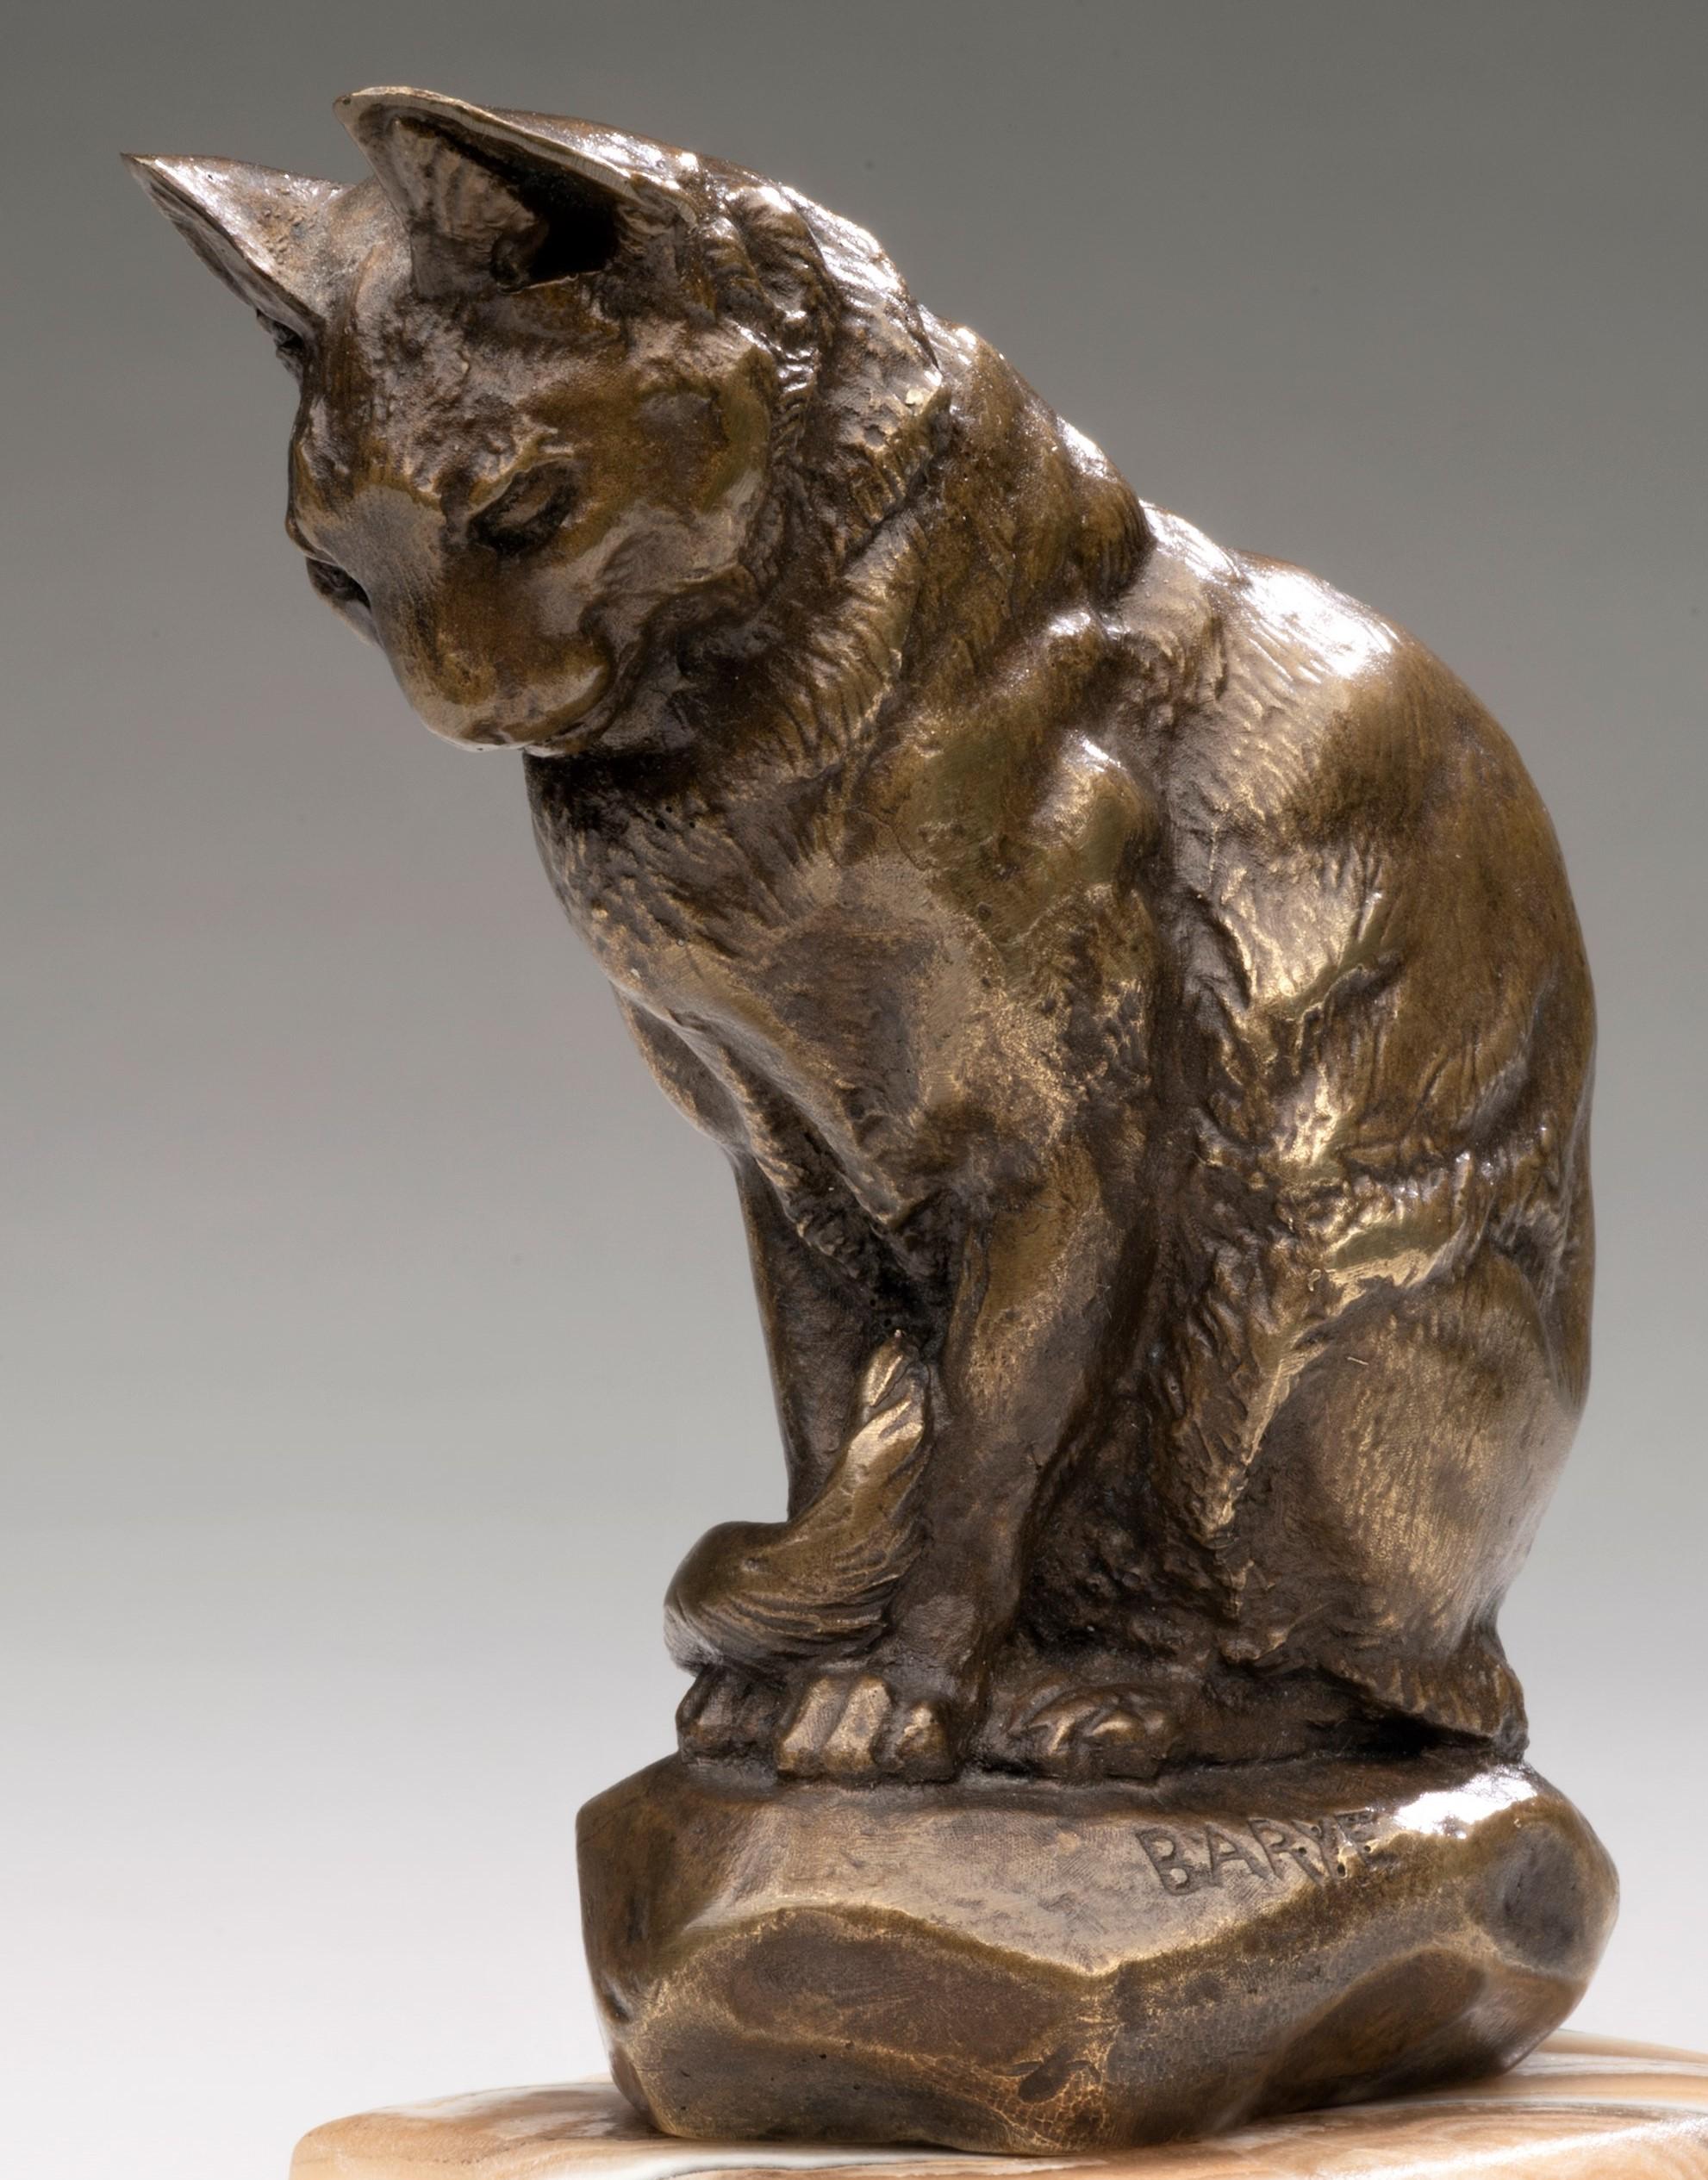 Bronze Model of a Seated Cat 
Antoine-Louis Barye (French, 1795-1875)
circa 1870's
Bronze, signed "BARYE" on the embankment
3 5/8 x 3 1/4 x 1 5/8 (4 3/4H on base) inches 

In the early 1870s, Baryes was often ill, staying at home, and spending time